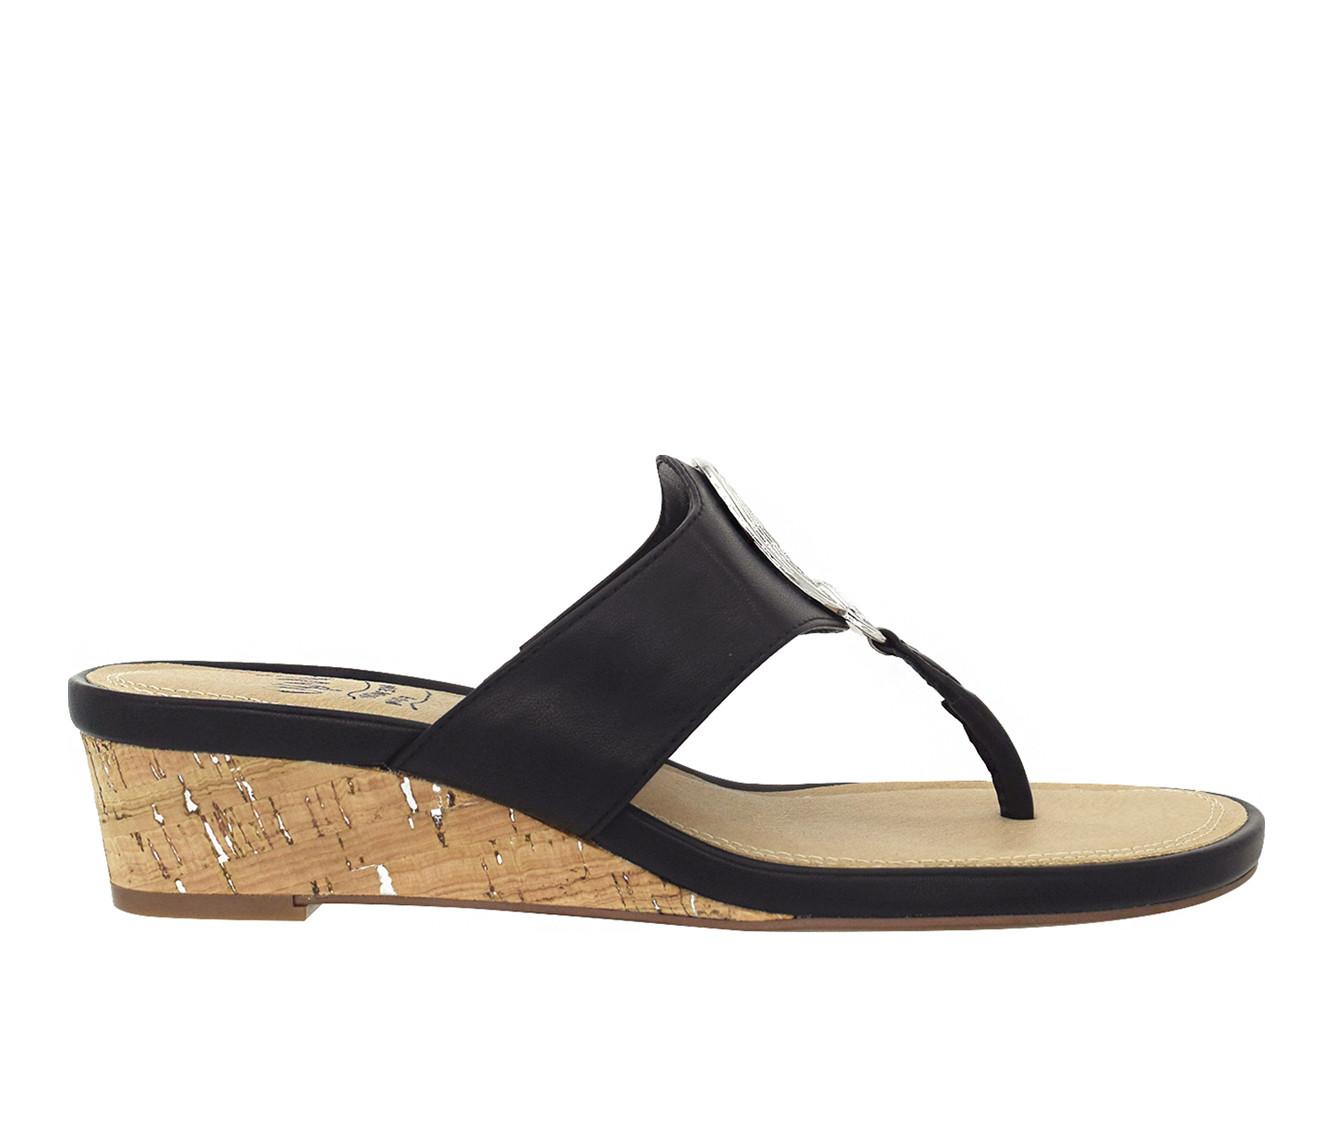 Women's Impo Rocco Wedge Sandals